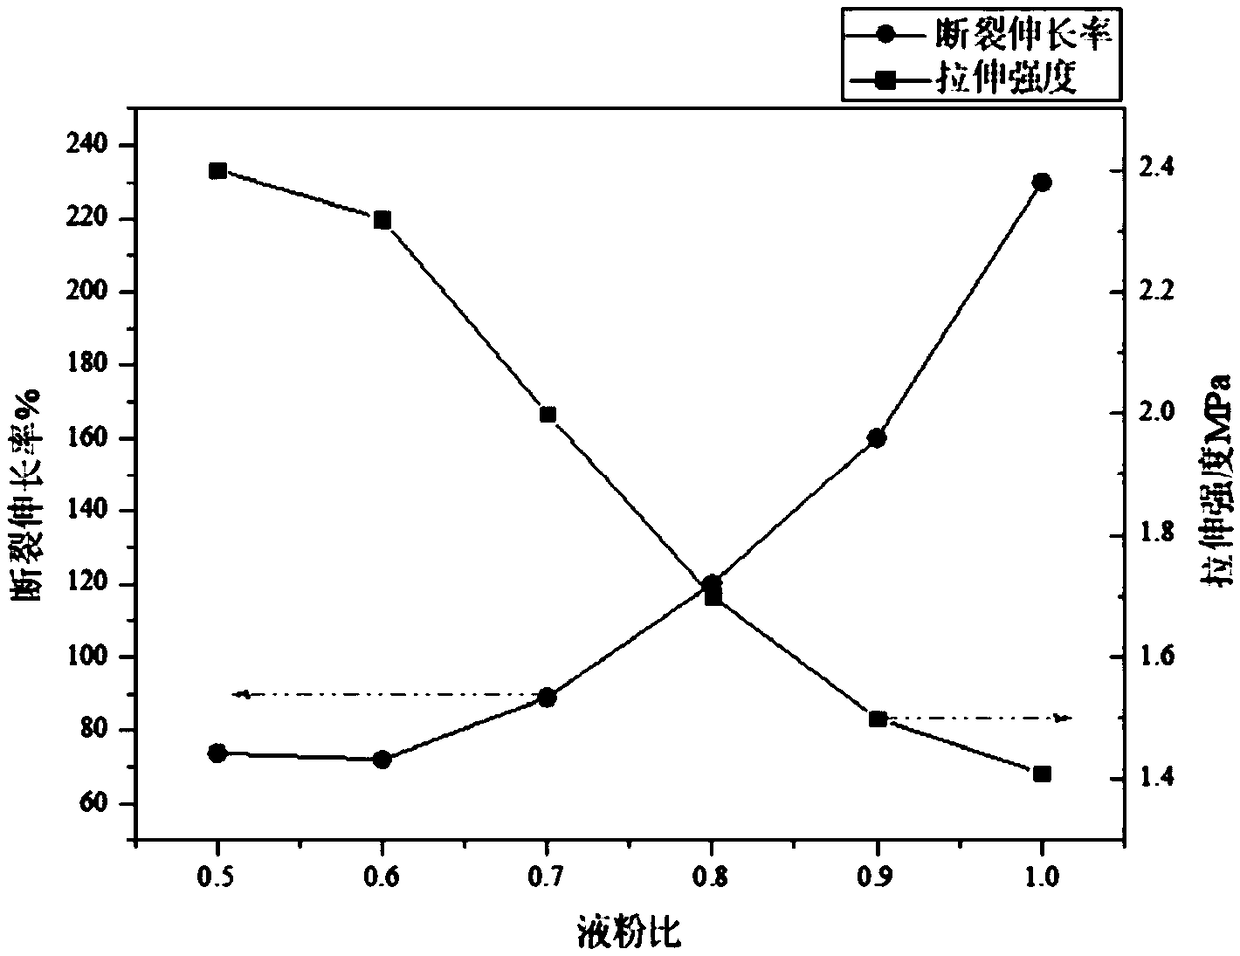 Zero-VOC (volatile organic compound) cement-based water-proof material copolymer emulsion and preparation method thereof